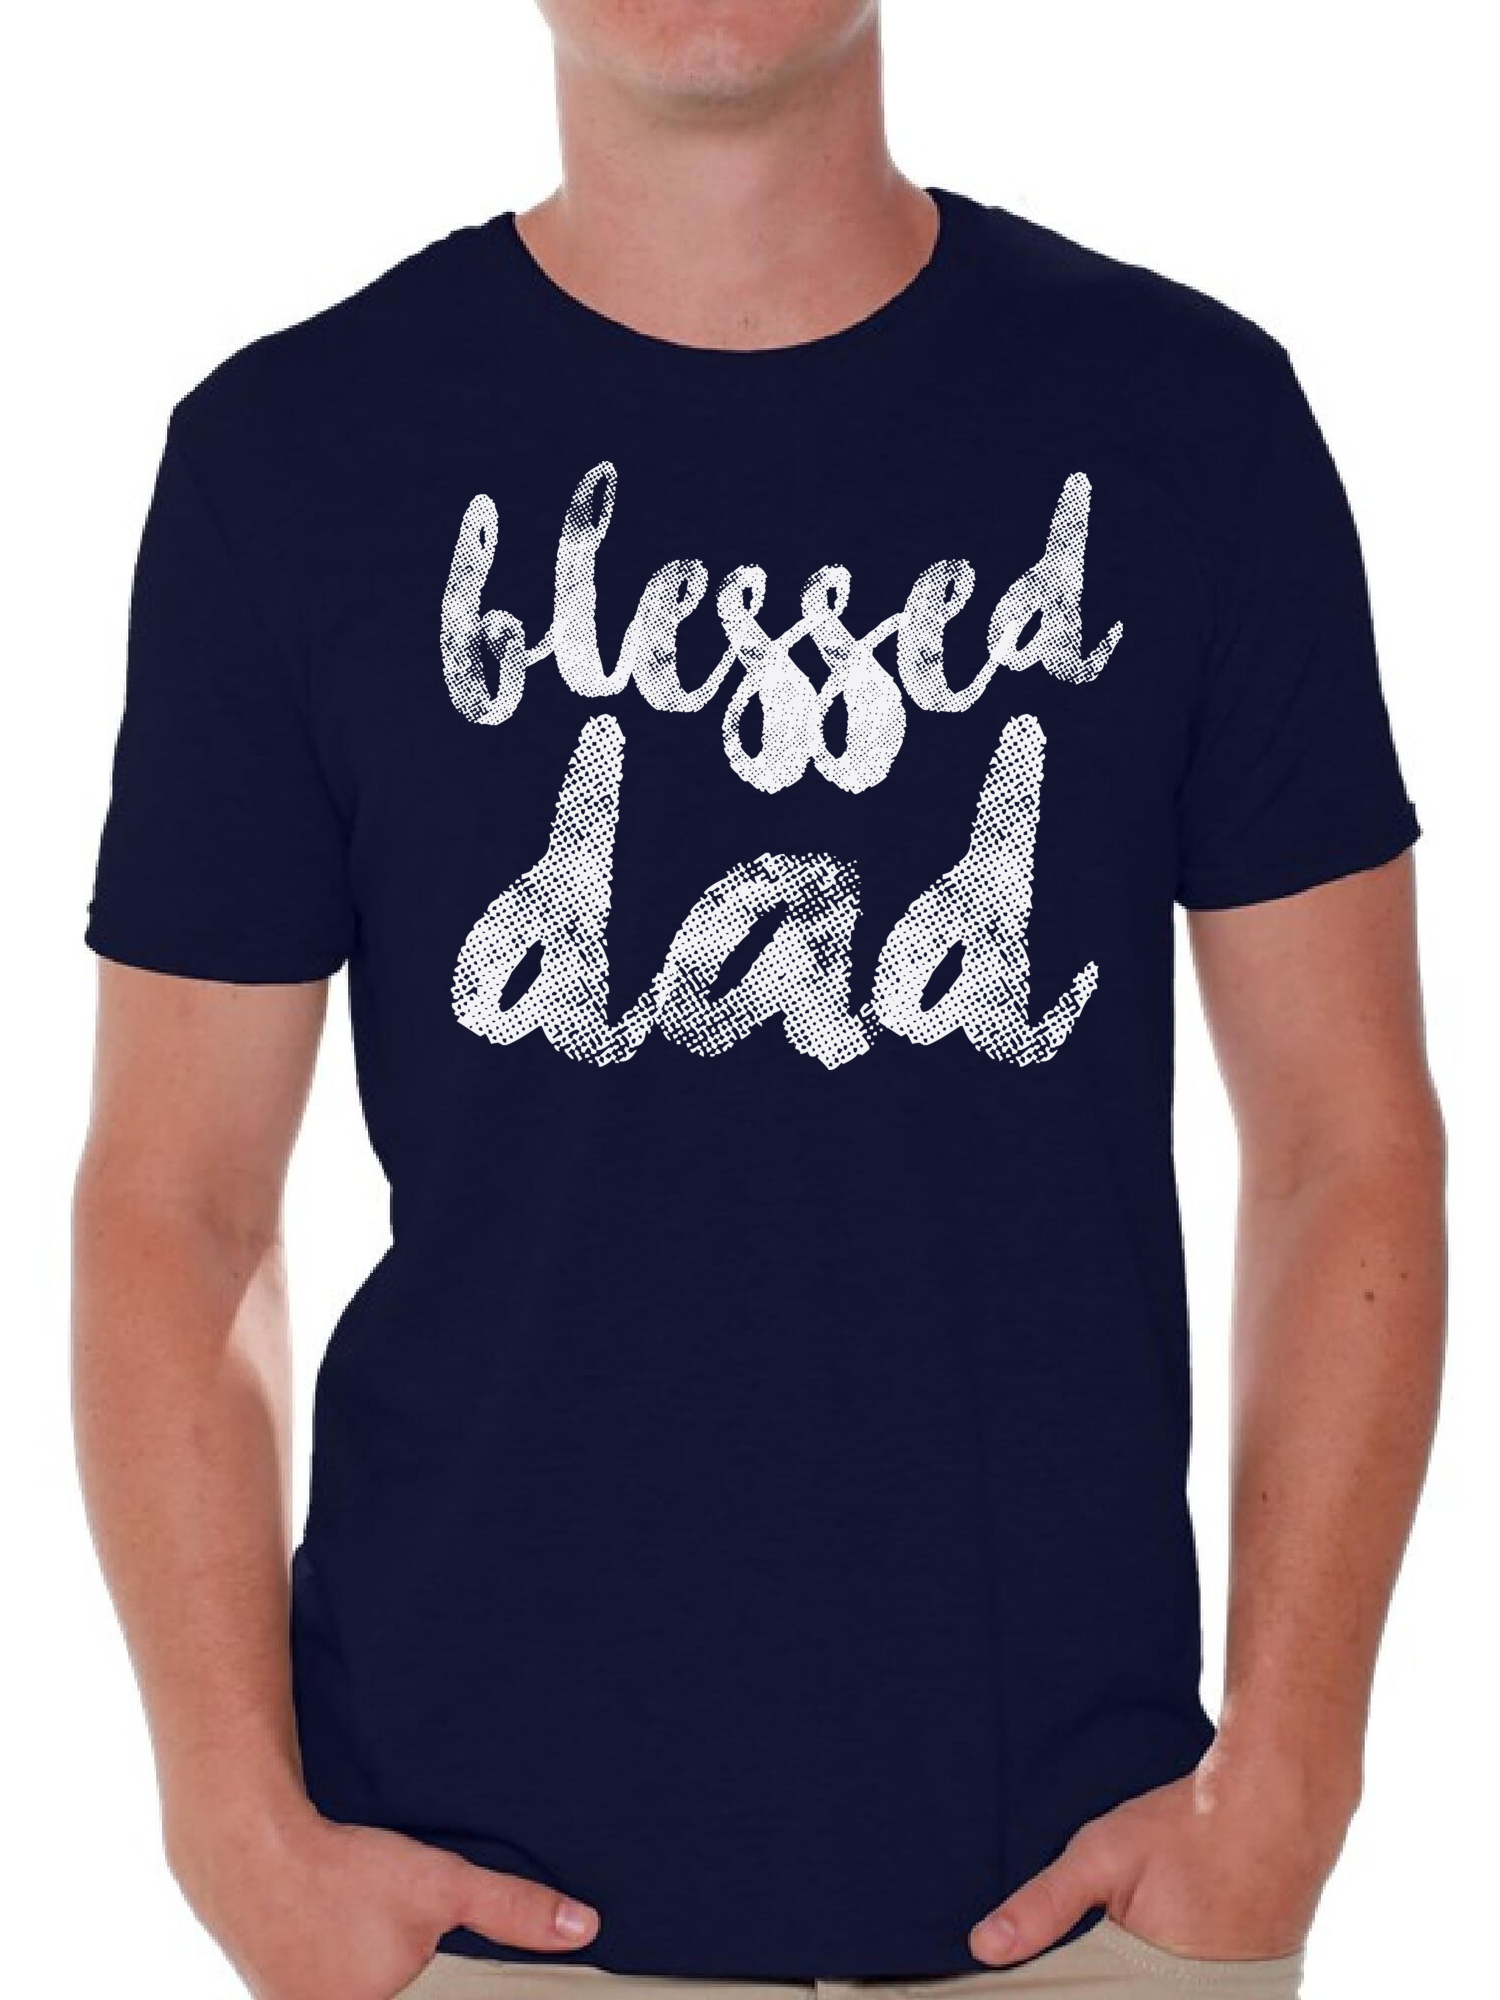 Awkward Styles Blessed Daddy Shirt Cute Gifts for the Best Dad Blessed Dad Best Father`s Day Gift Best Father T Shirt Father`s Day Men Shirt Tshirt for Dad Father`s Day Gifts Ideas - image 1 of 4